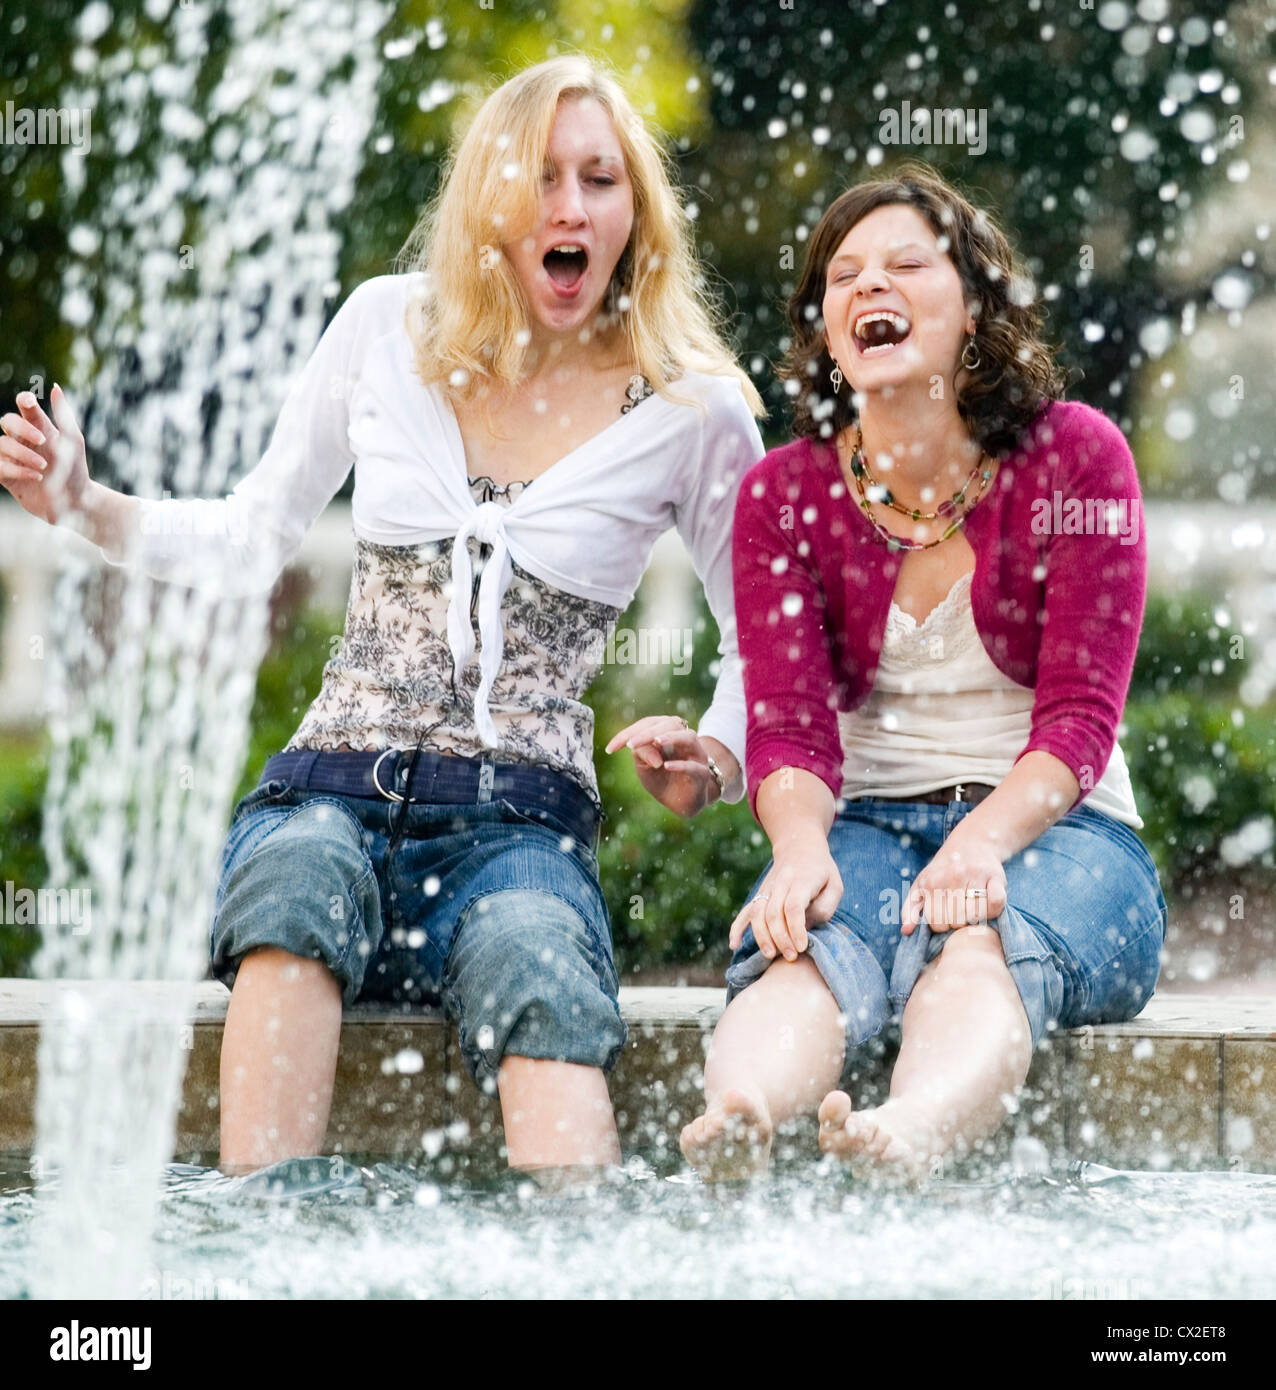 Two girls sit on the edge of a fountain laughing as they dip their feet in the water. Stock Photo